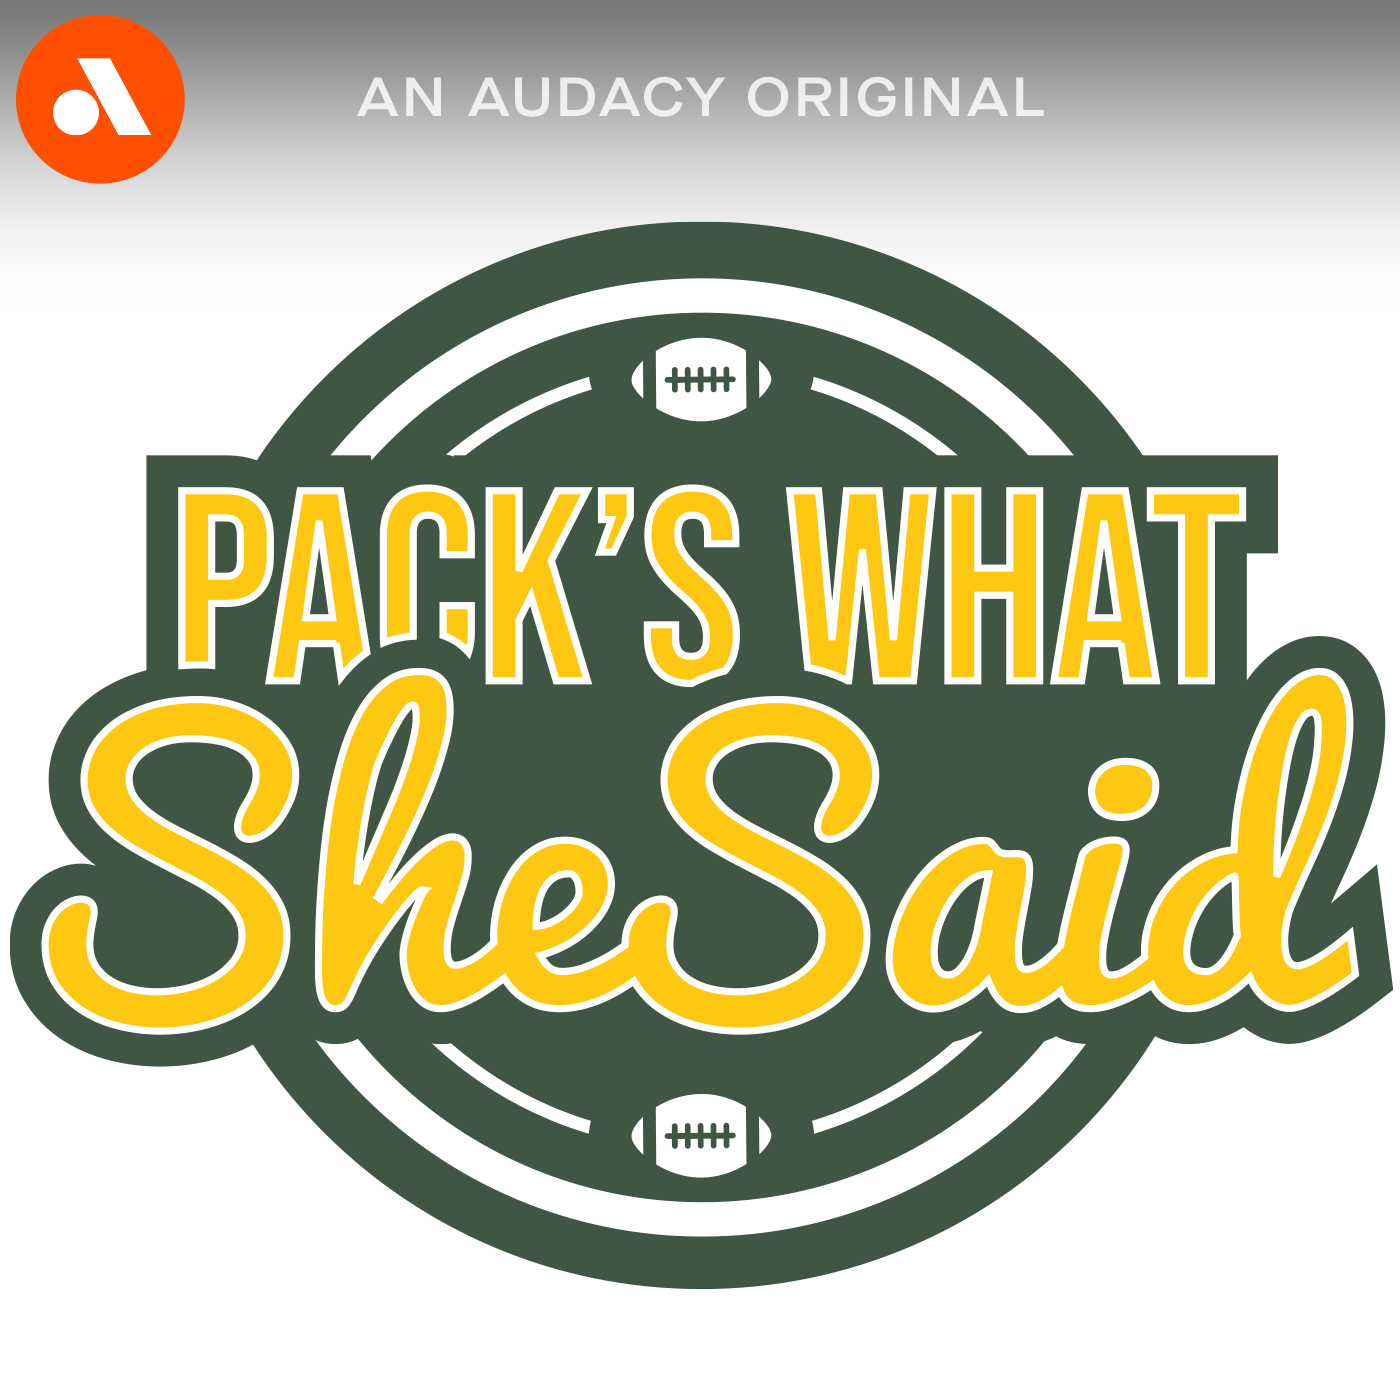 BONUS: The Packers Focused on Drafting Athletes | 'Pack's What She Said'